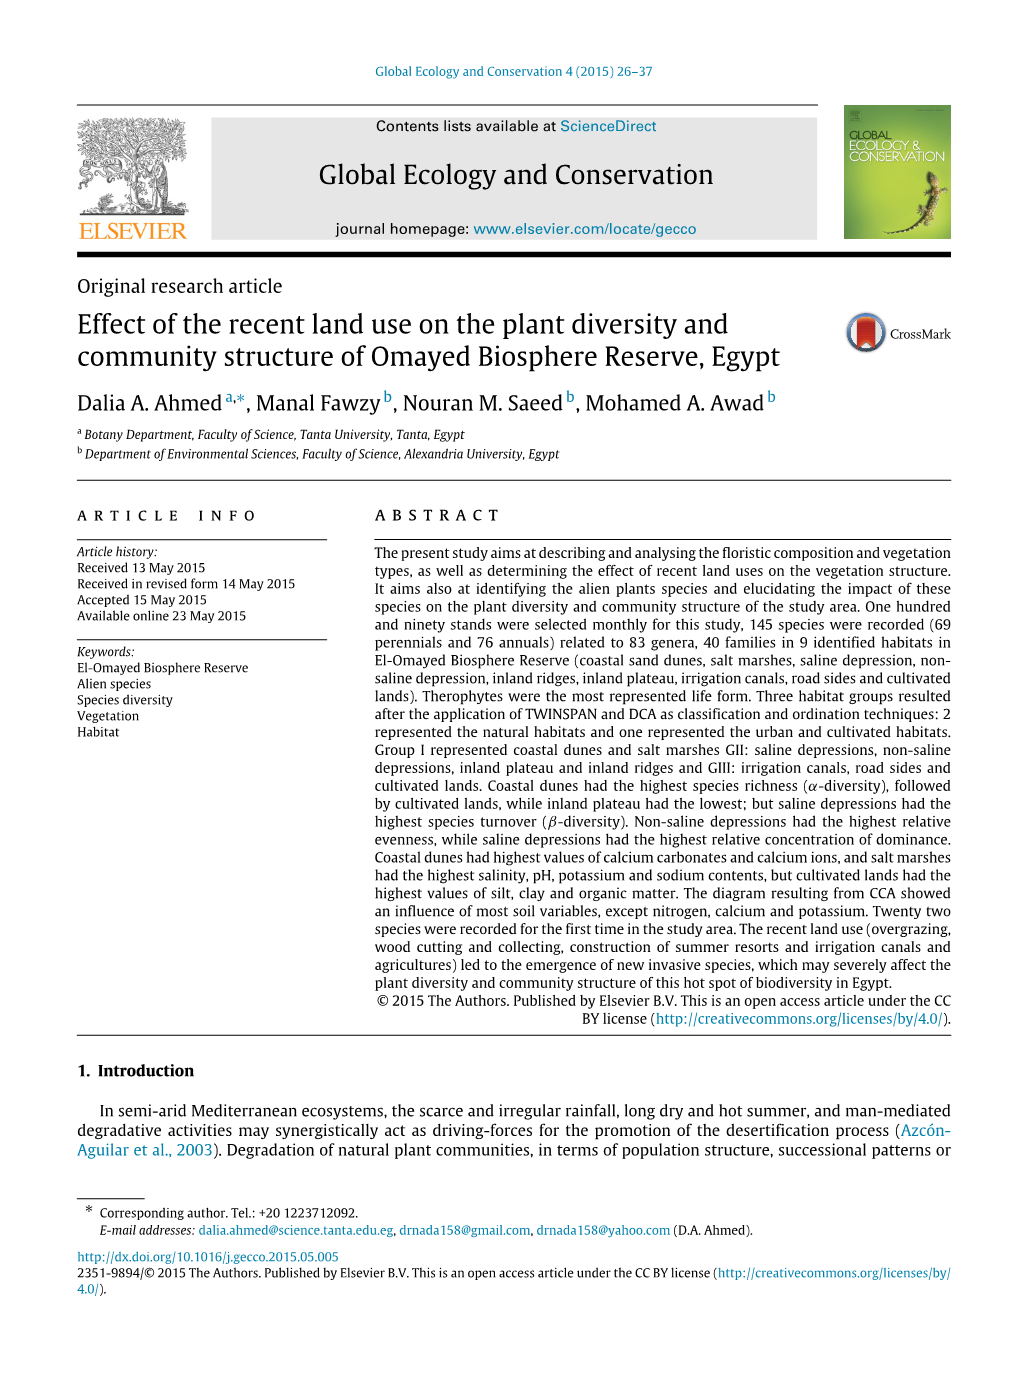 Effect of the Recent Land Use on the Plant Diversity and Community Structure of Omayed Biosphere Reserve, Egypt